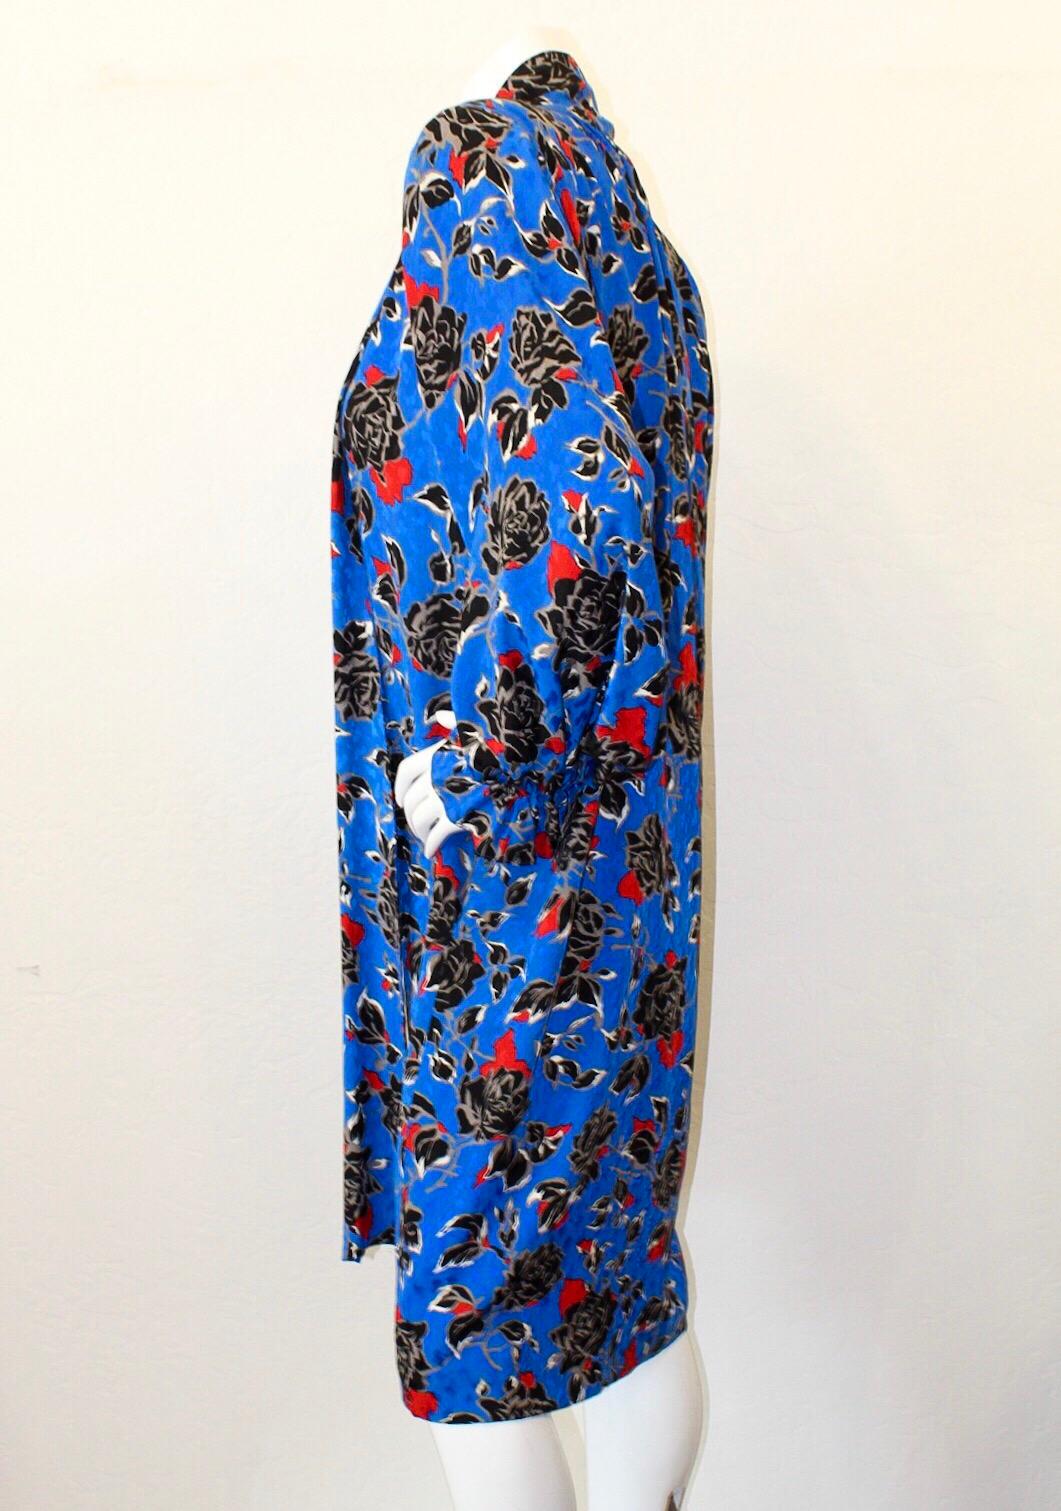 Show off your inner chic 80's girl with this amazing YSL dress! Features a black and red floral pattern on top of the contrasting overall bright royal blue color. Includes bishop sleeves with a ruffle cuff and a pussycat bow neck tie. The perfect